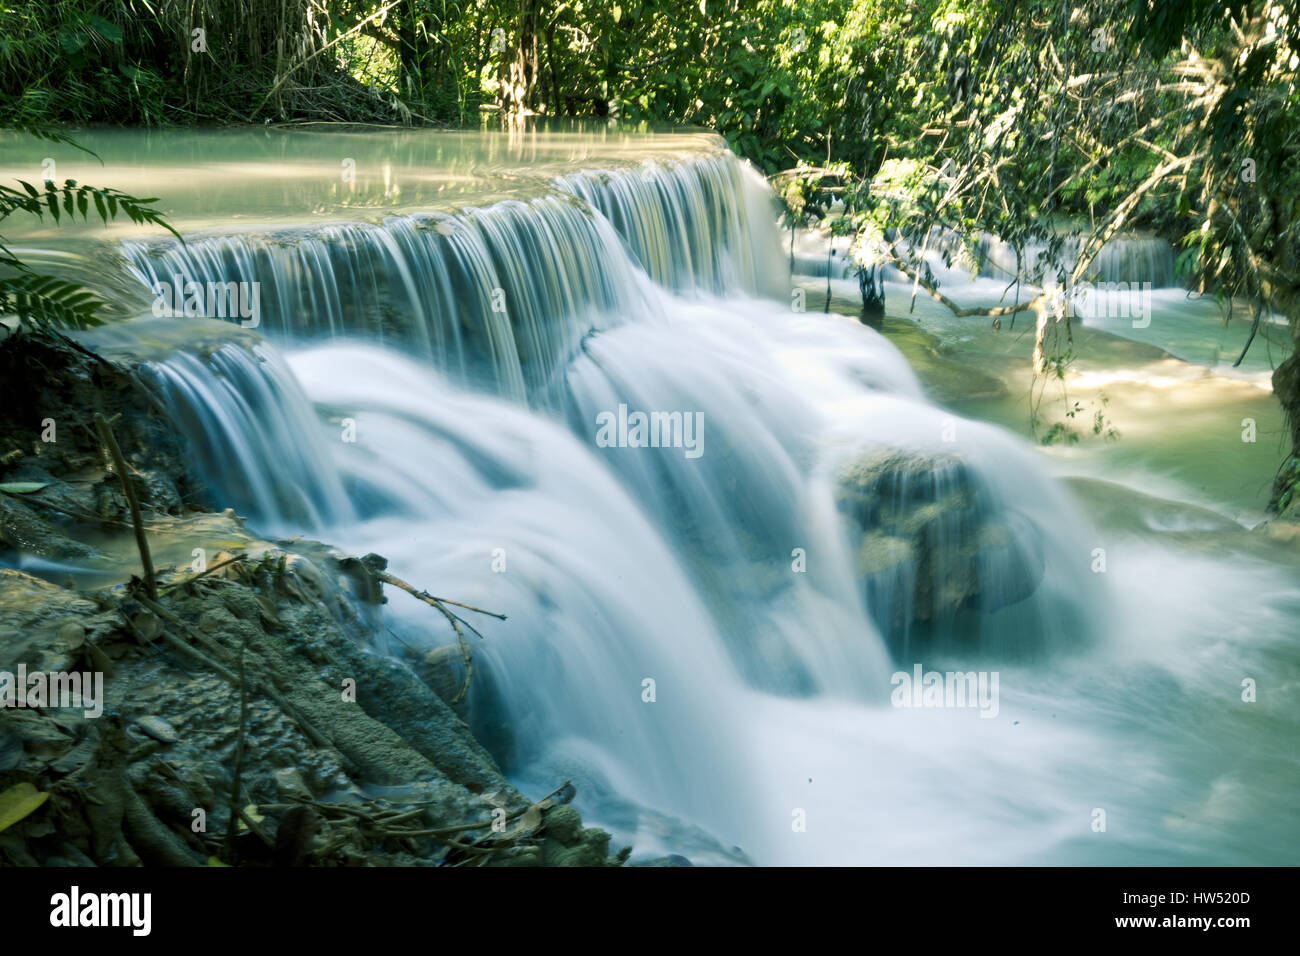 The spectacular Kuang Si Falls also known as Tat Kuang Si Waterfalls is a popular tourist destination in Luang Prabang, Laos. Stock Photo